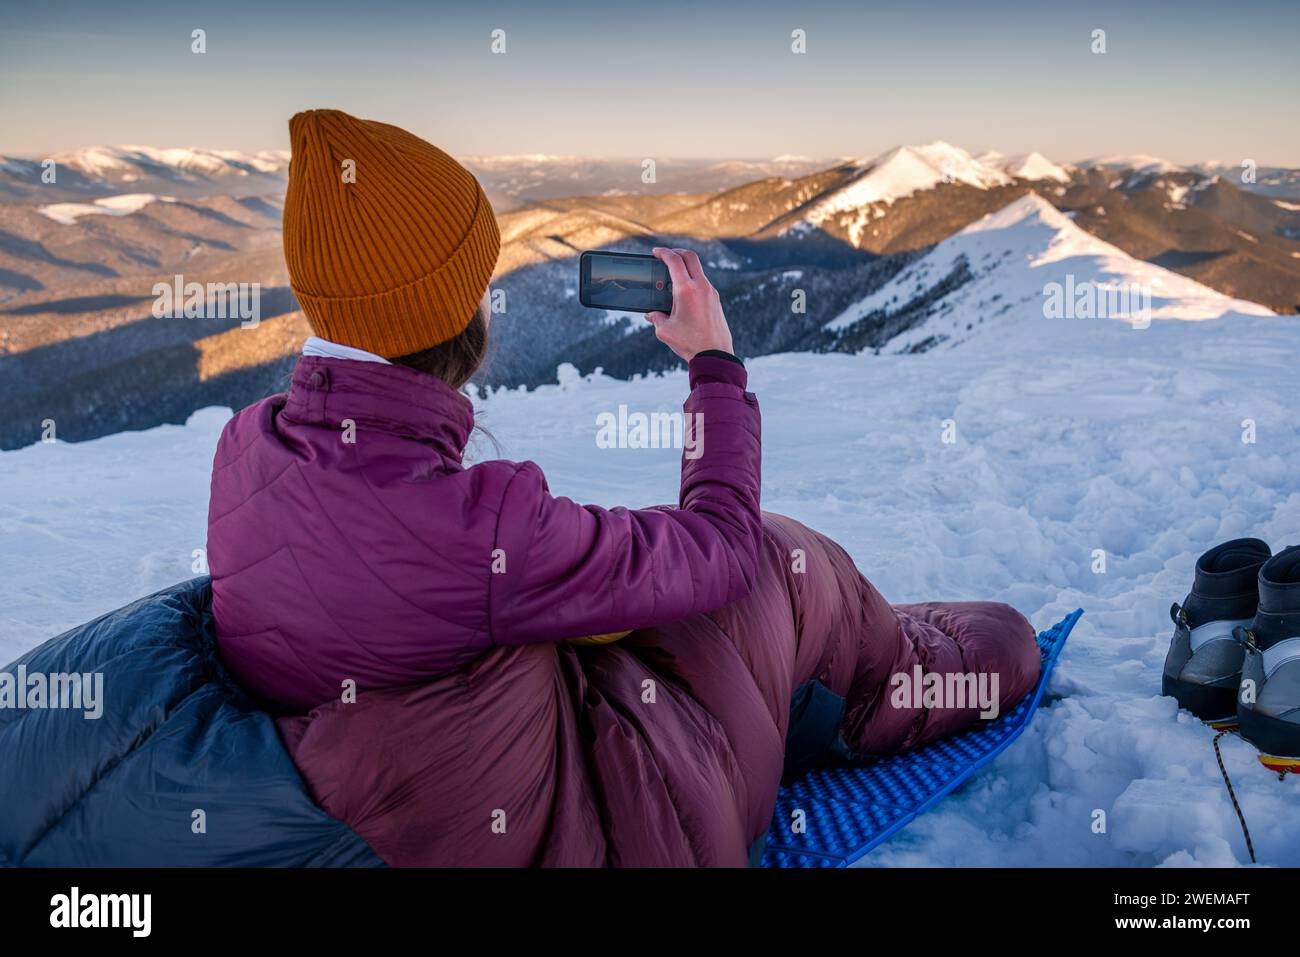 Woman in Sleeping Bag Using Mobile Phone Capturing The Snow Mountains Stock Photo